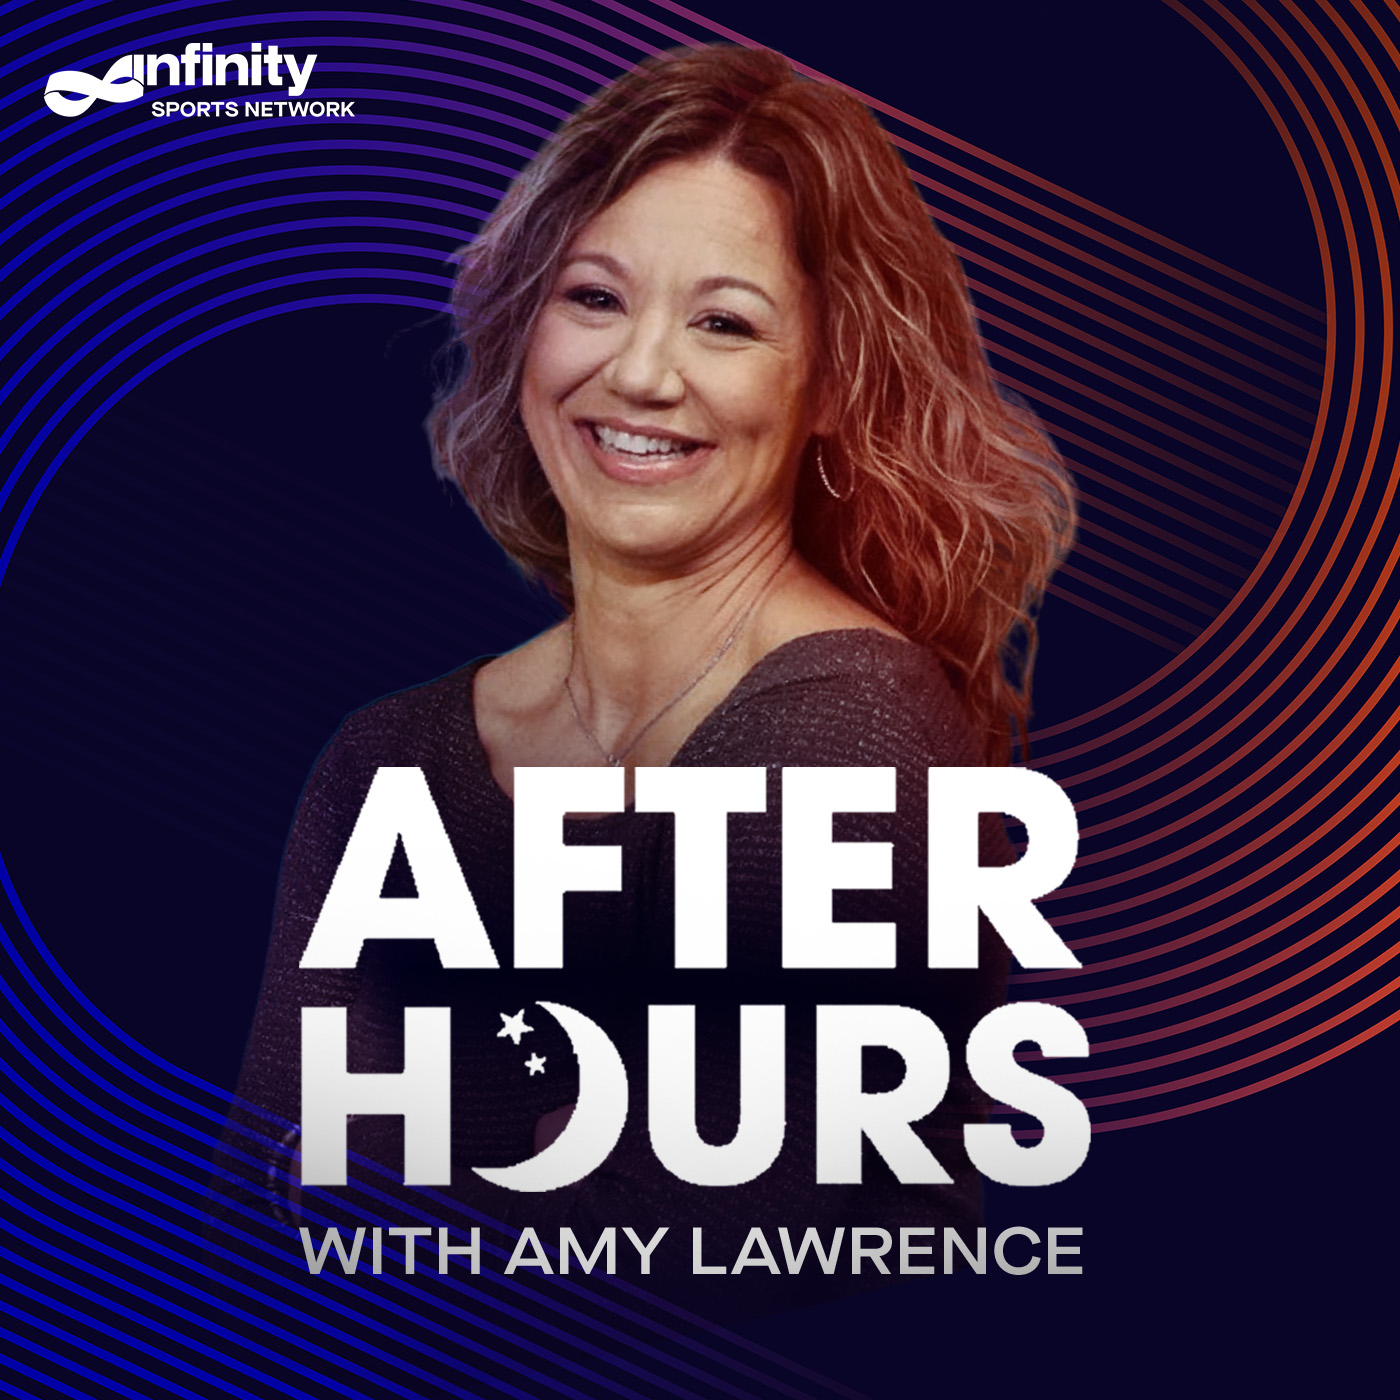 10-26-21 After Hours with Amy Lawrence PODCAST: Hour 4